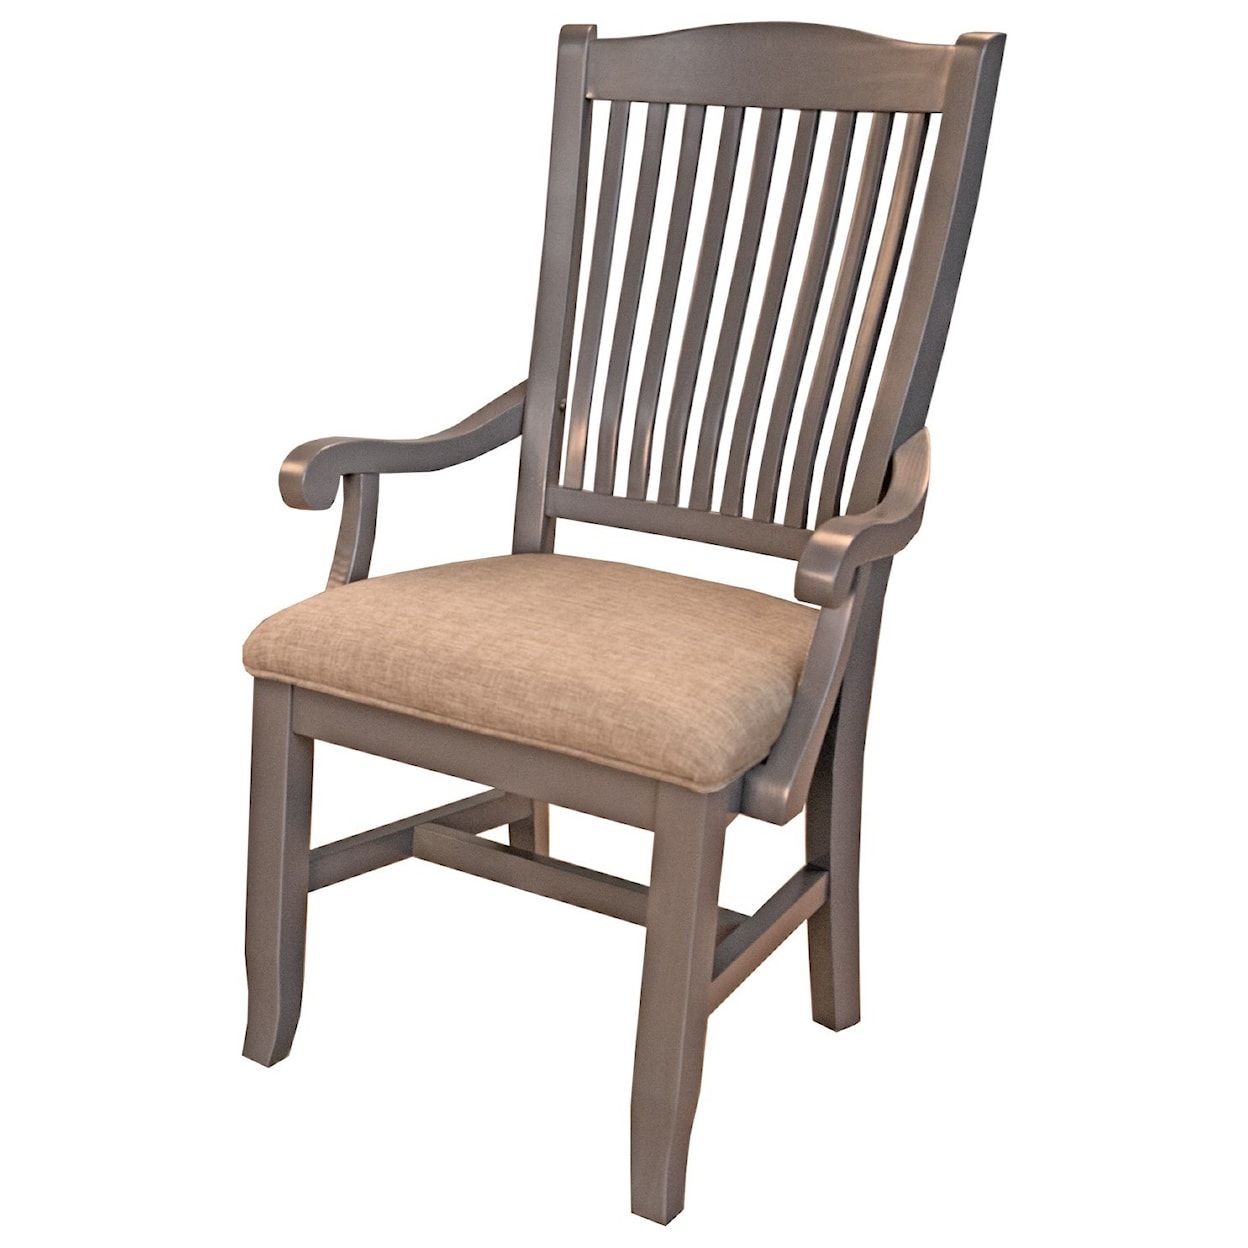 AAmerica Port Townsend Slatback Arm Chair with Upholstered Seat